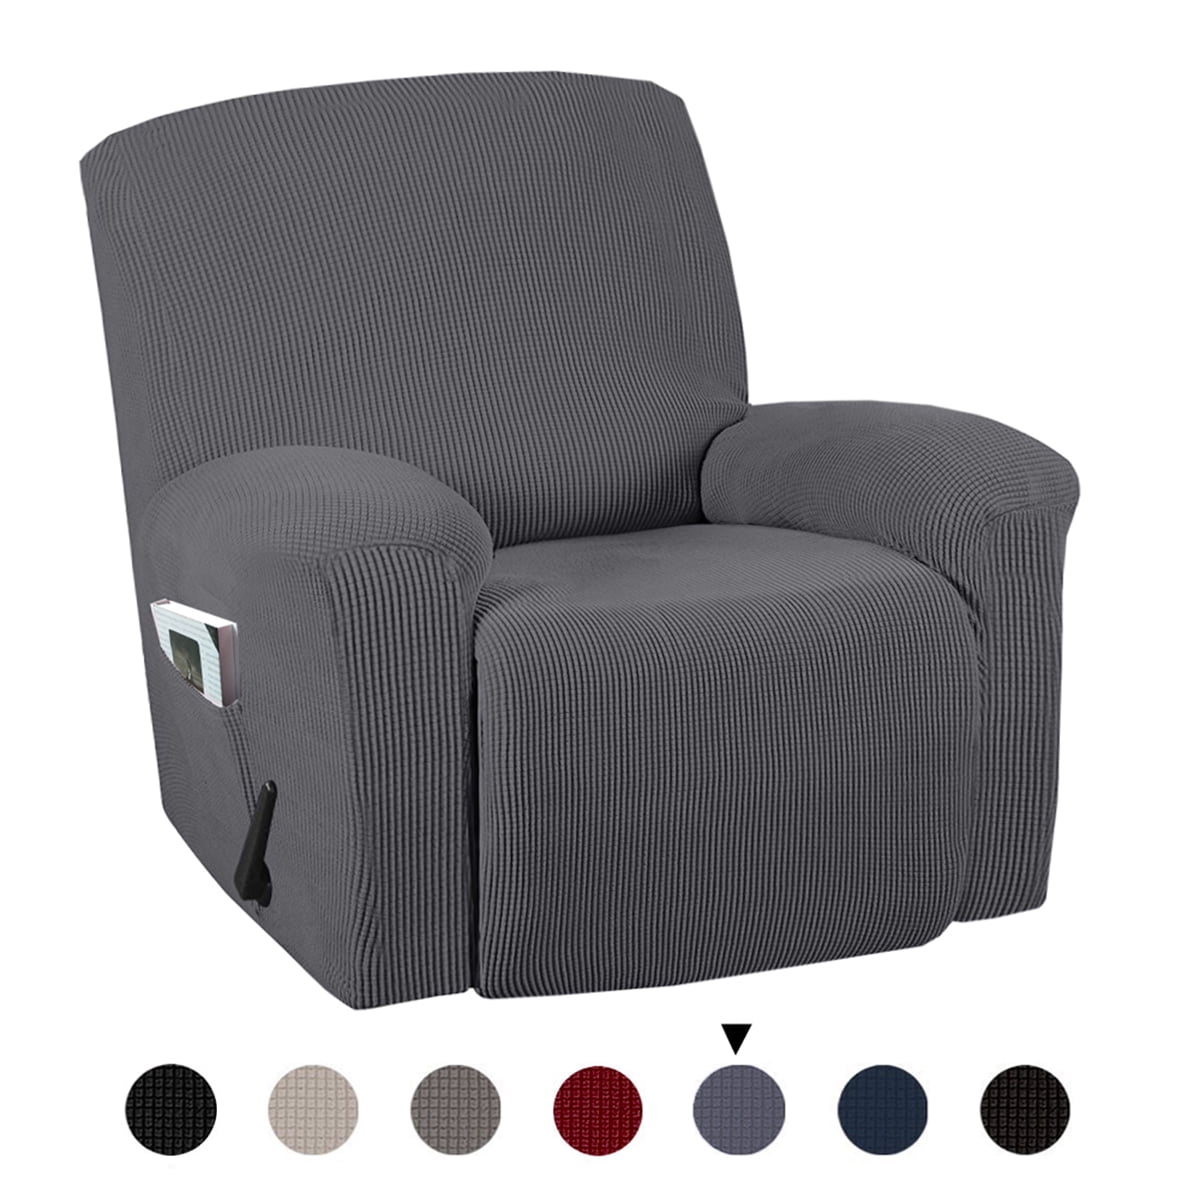 Waterproof Recliner Cover Chair Couch Sofa Furniture Seat Slipcover Protector 